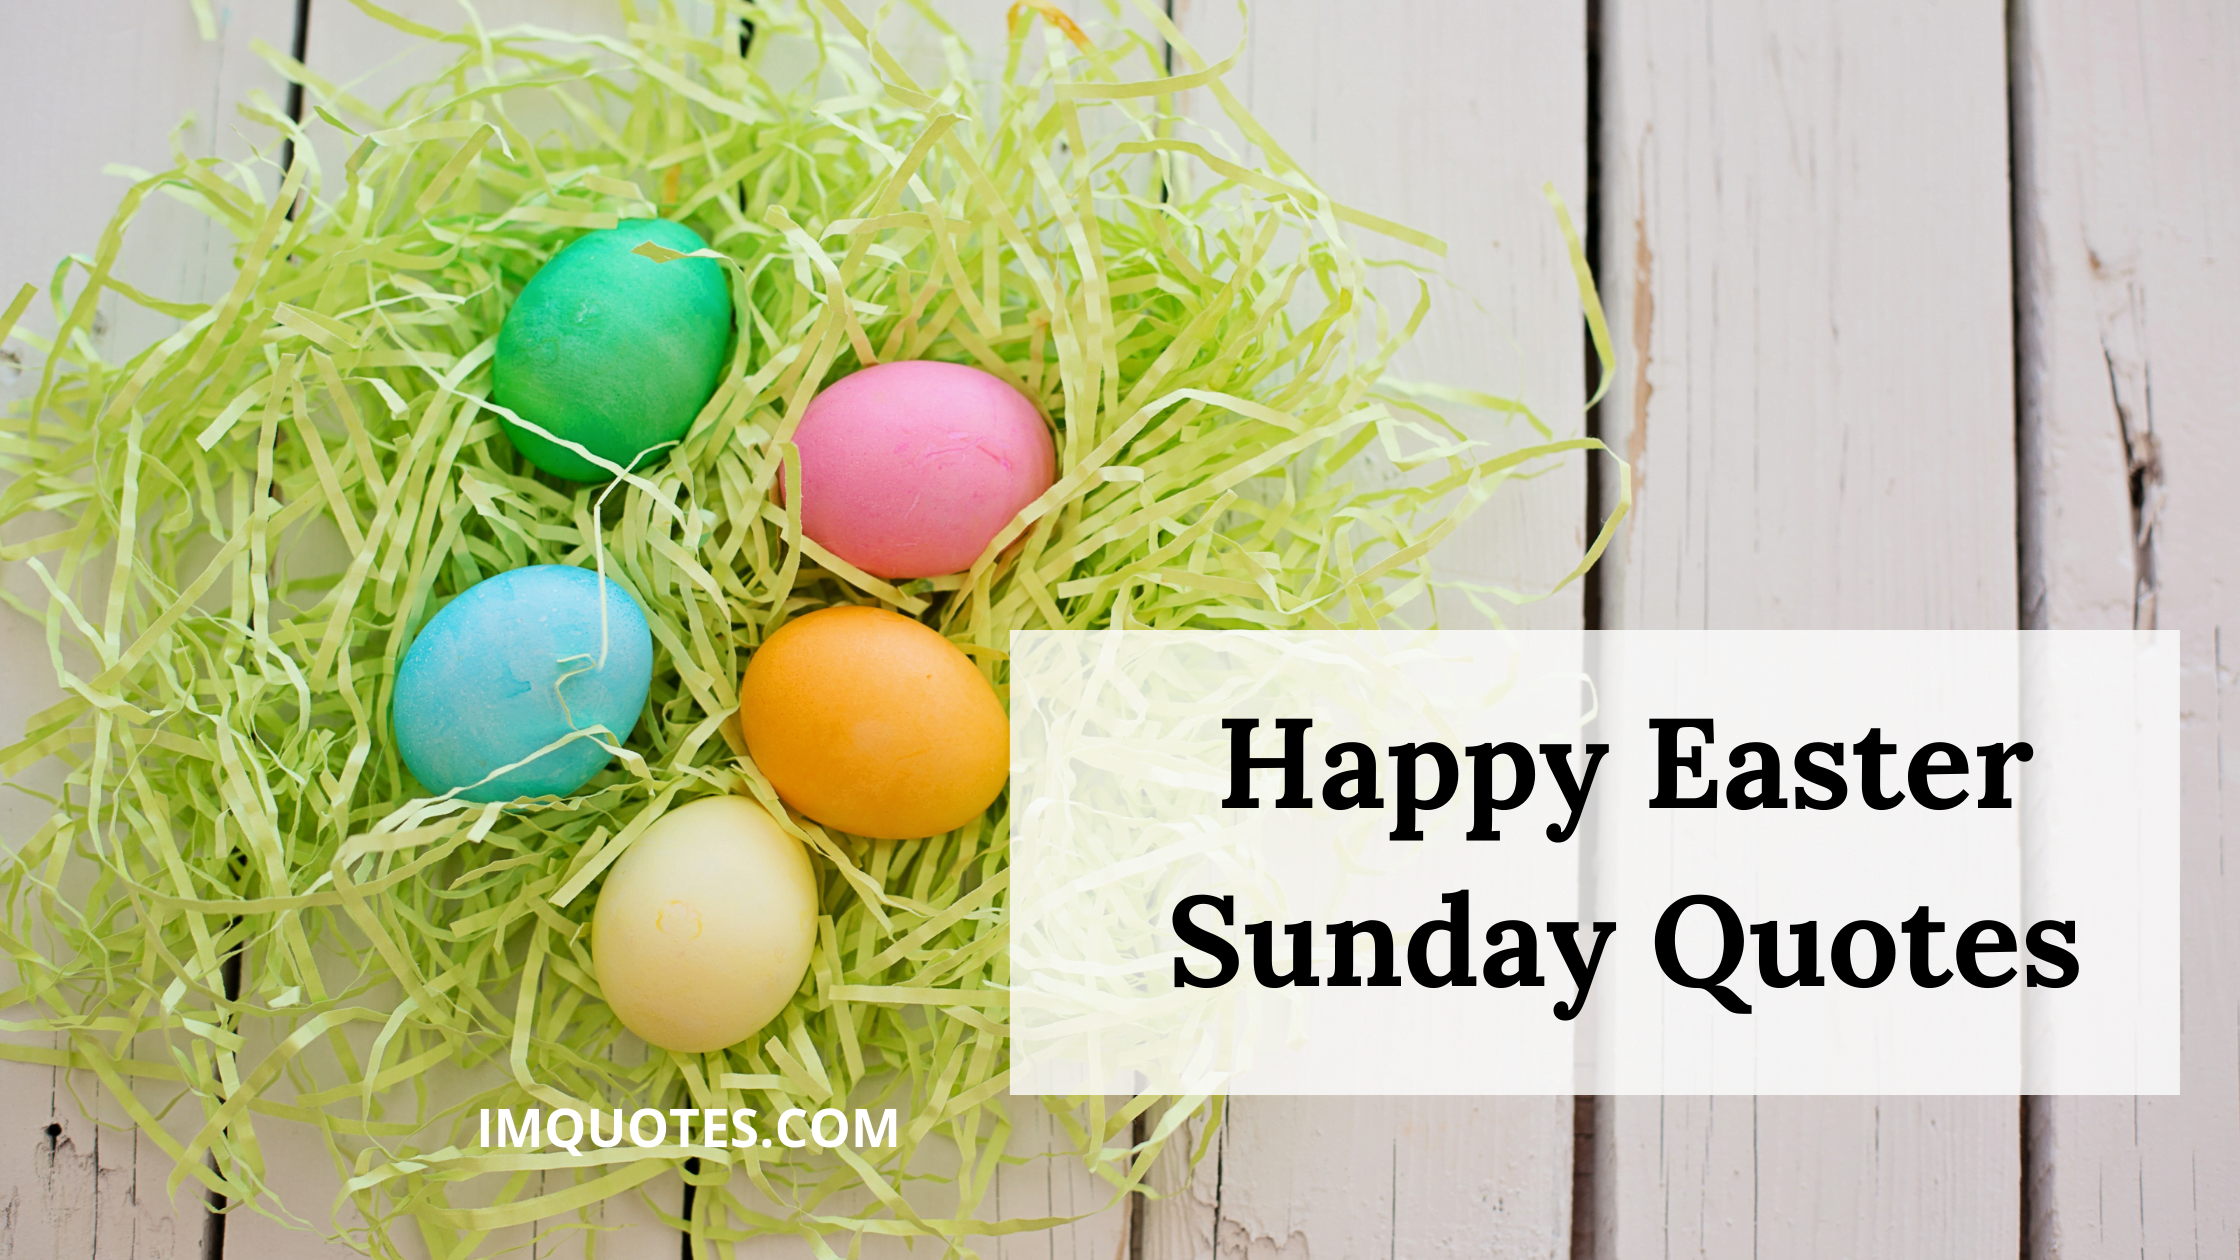 Happy Easter Sunday Quotes